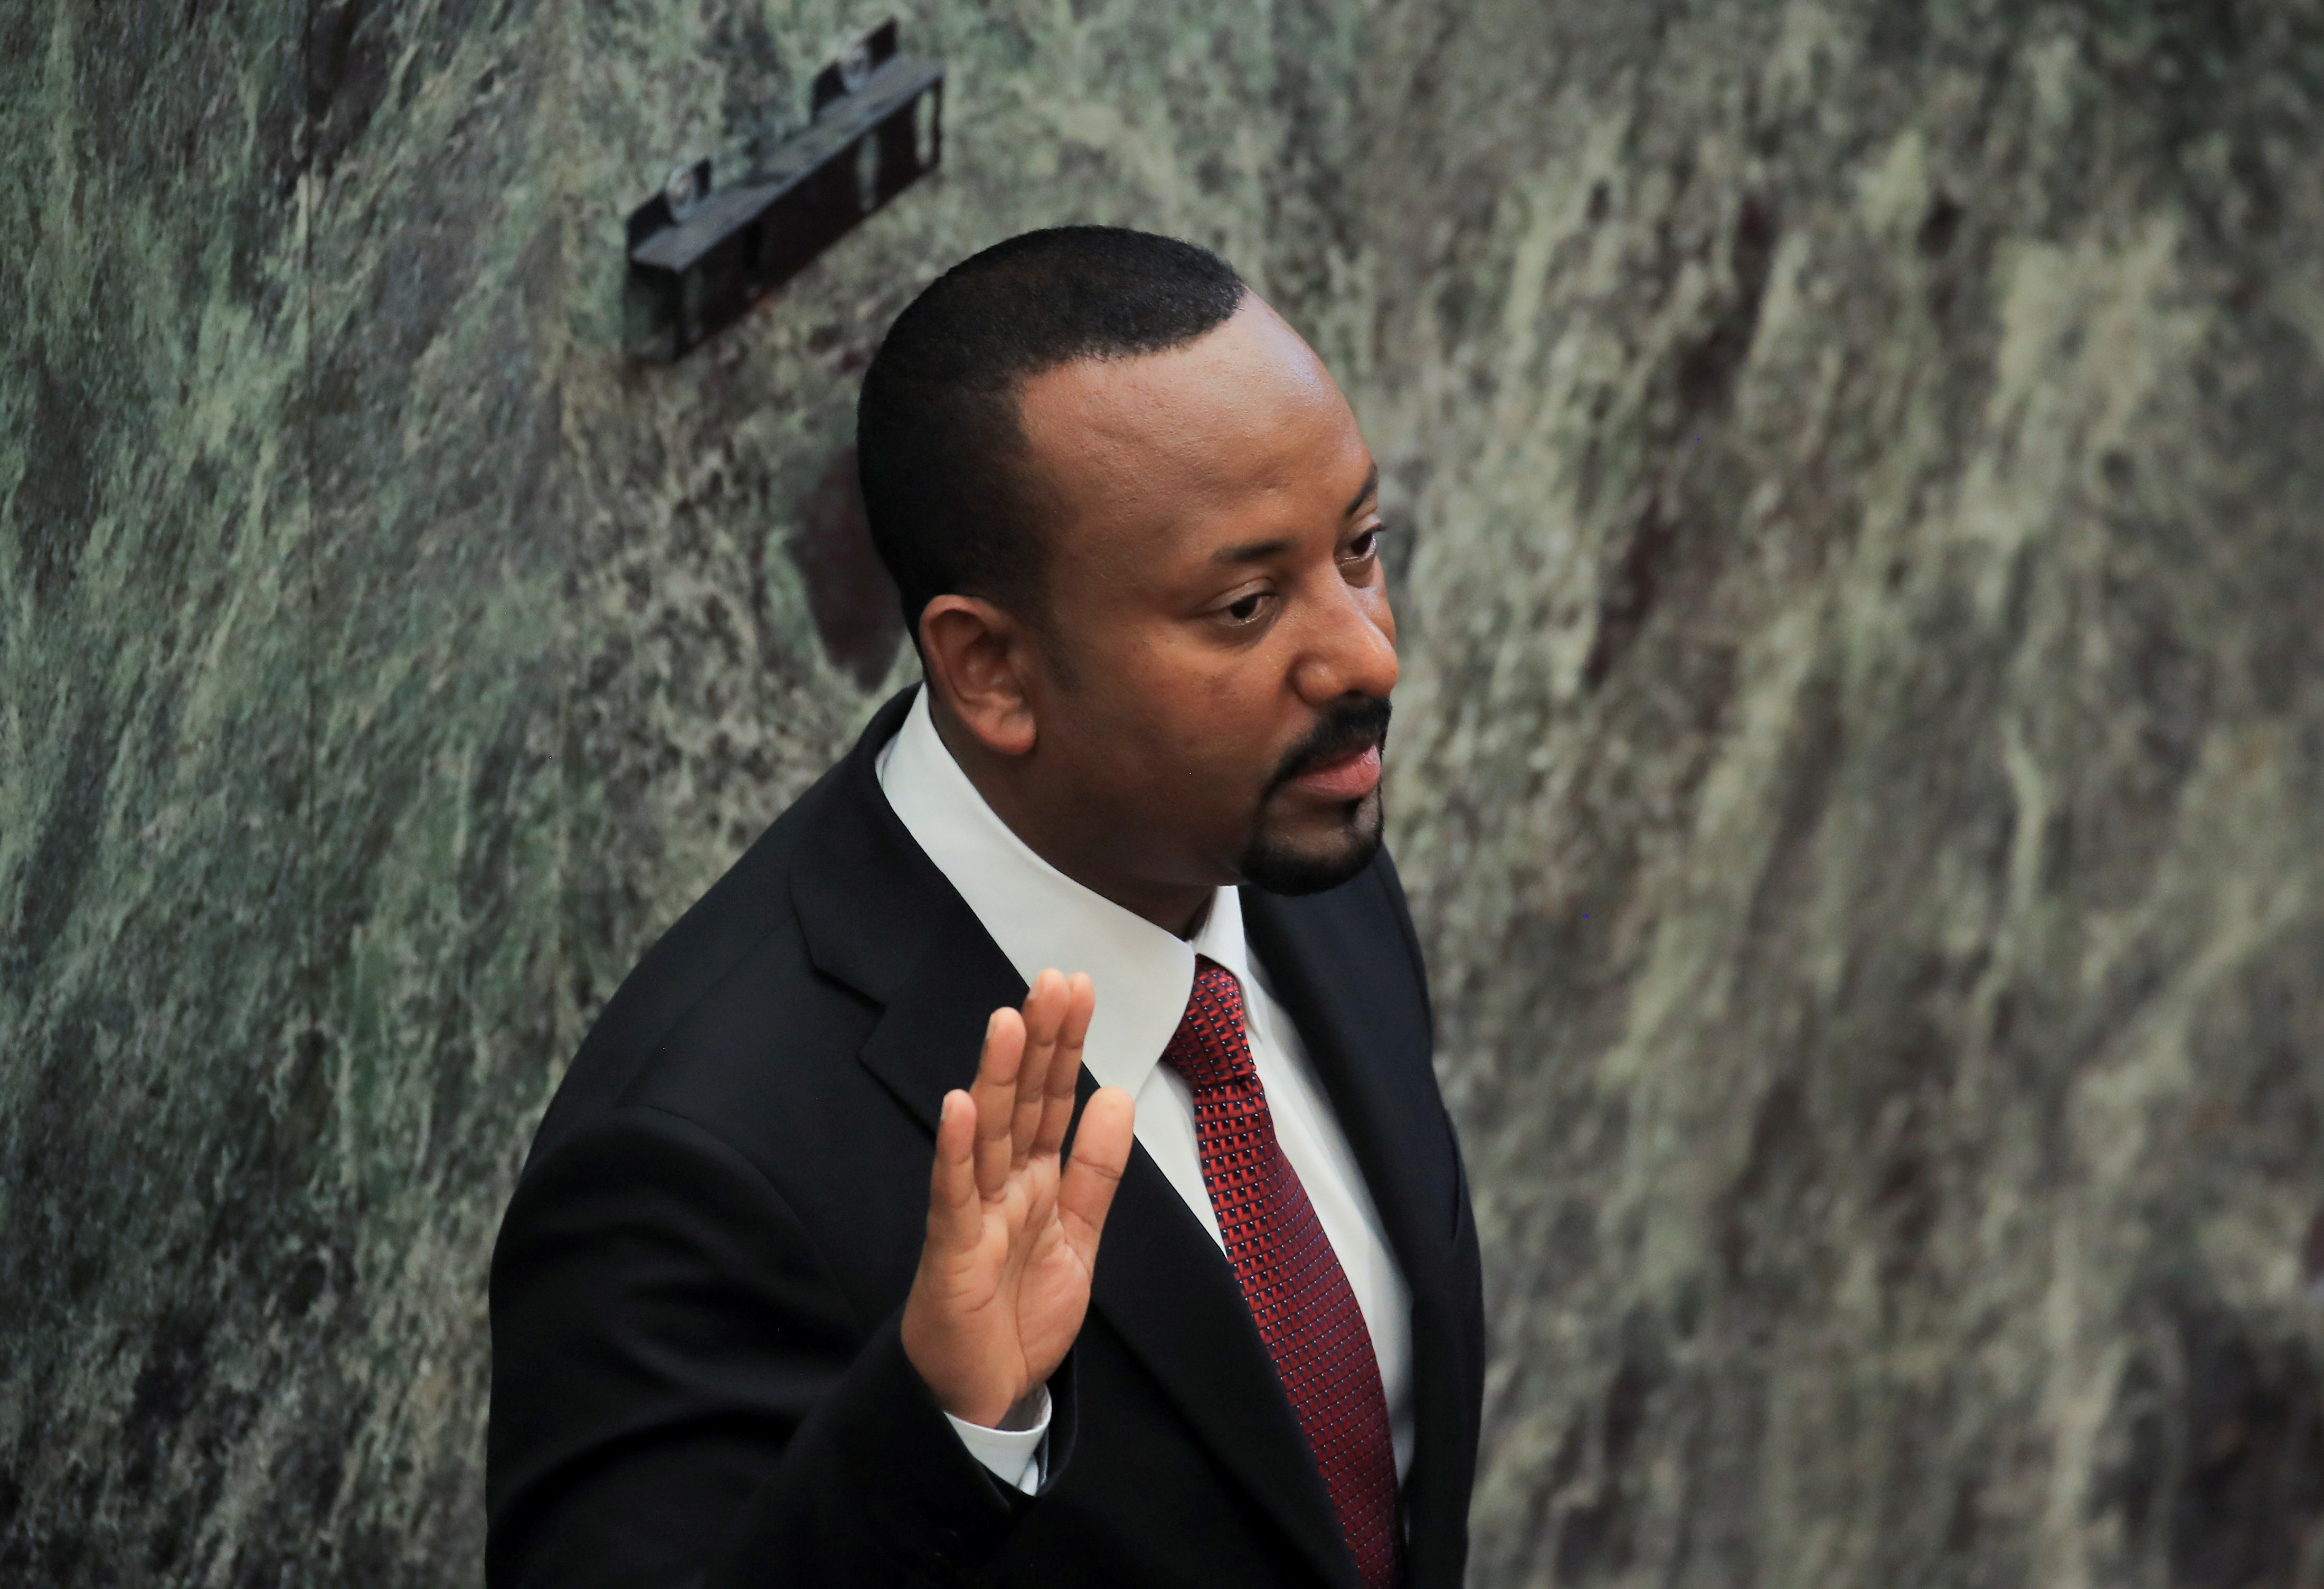  Ethiopia's Prime Minister Abiy Ahmed takes oath during his incumbent ceremony at the Parliament building in Addis Ababa, Ethiopia October 4, 2021. REUTERS/Tiksa Negeri/File Photo